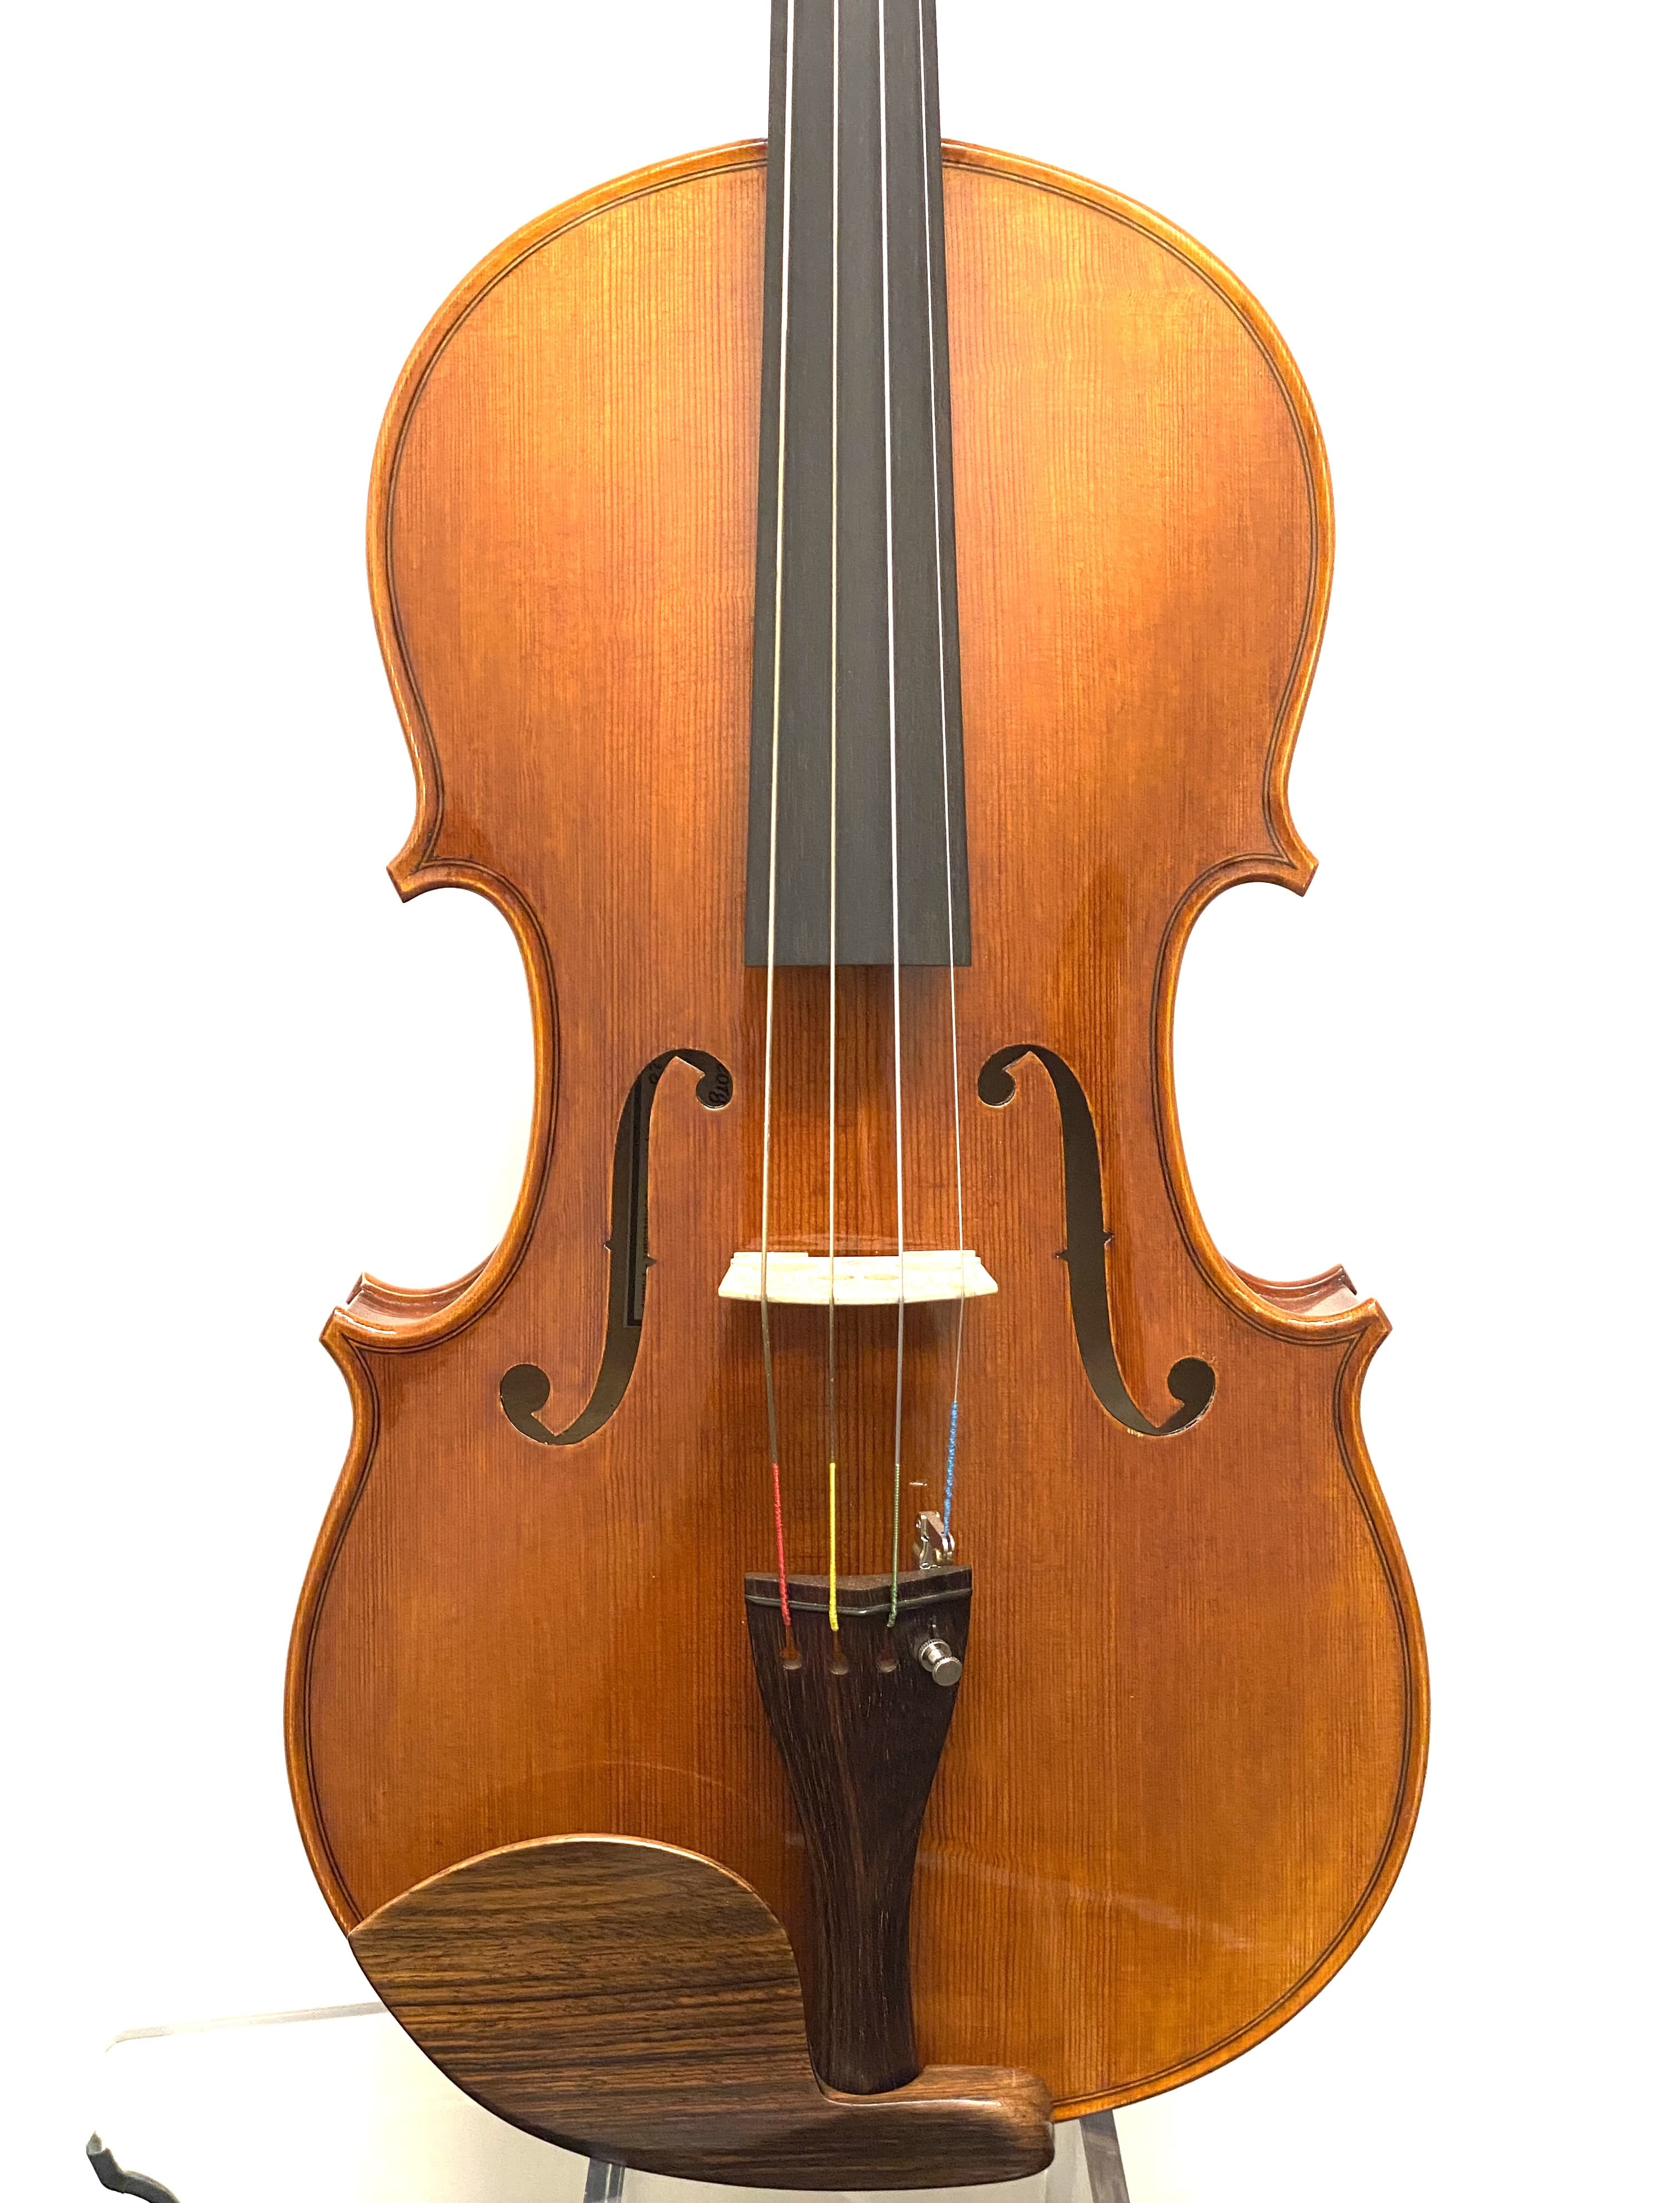 【Viola】Aubert Lutherie #Georges Michel（オベール・リューテリエ）